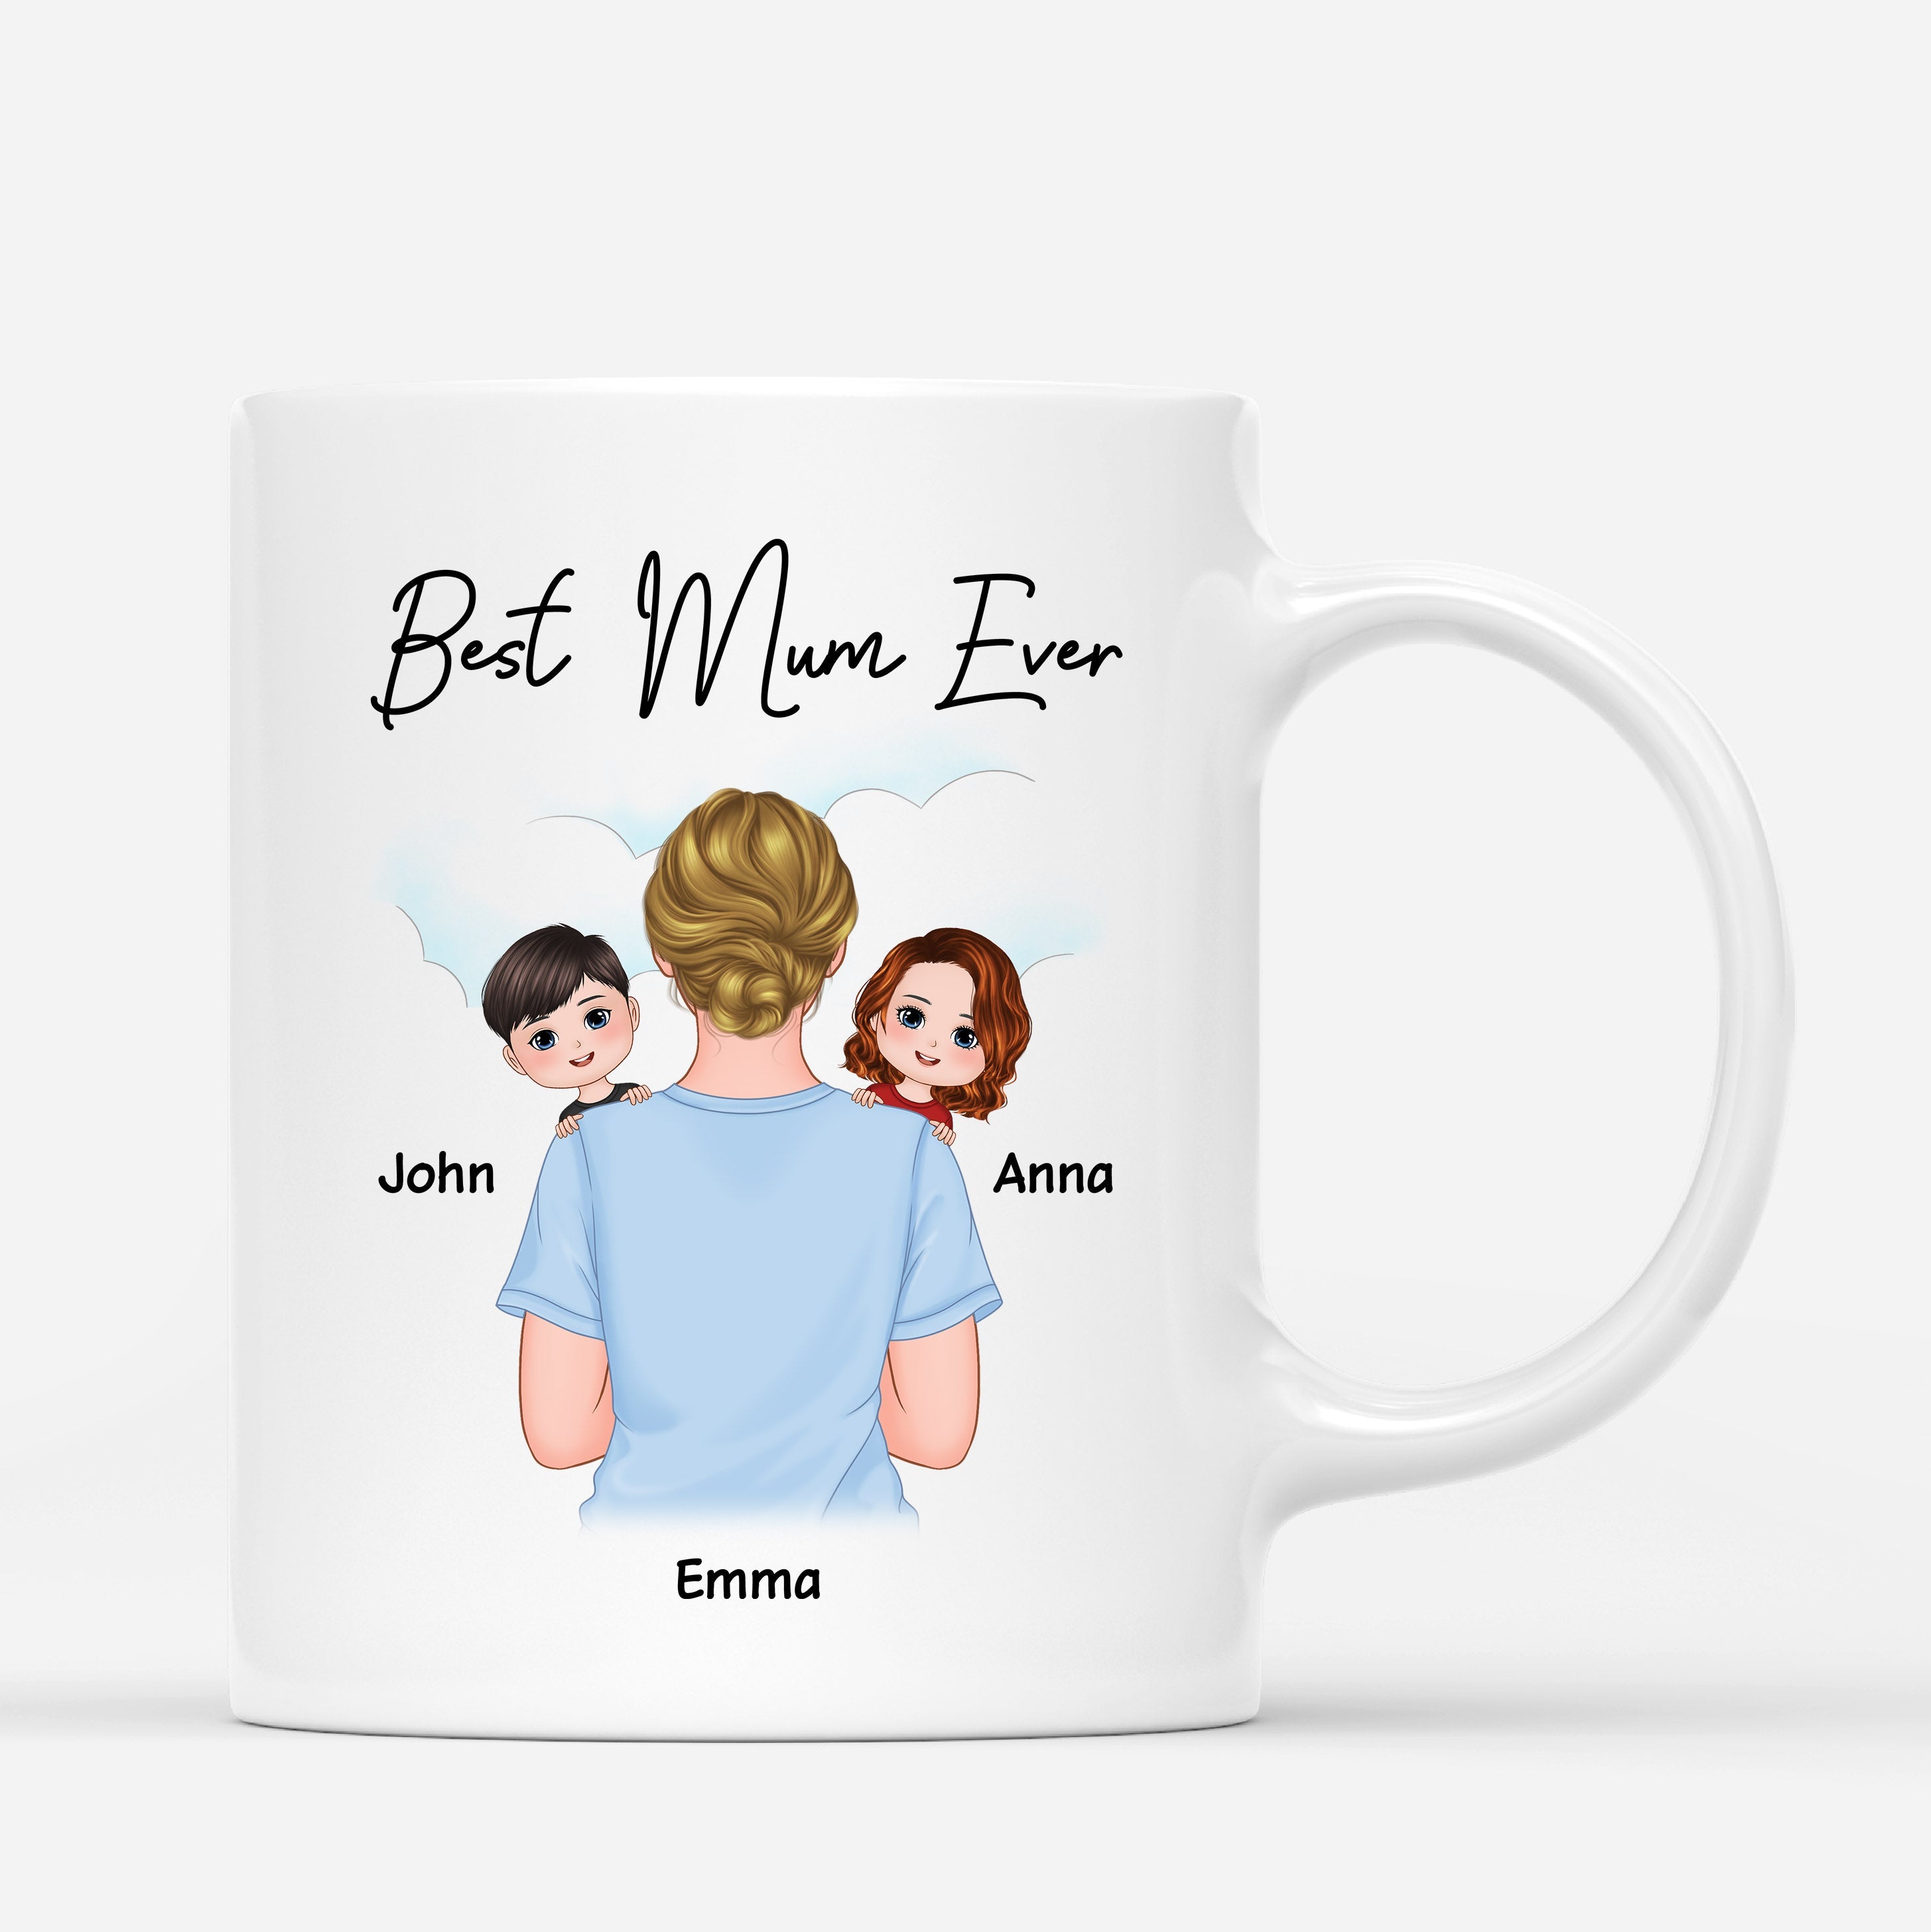 0772MUK1 Personalised Mugs Gifts Shoulder Mum Mothers Day_39e5bdf1 241e 405d 9a1c 24a0e5454f18